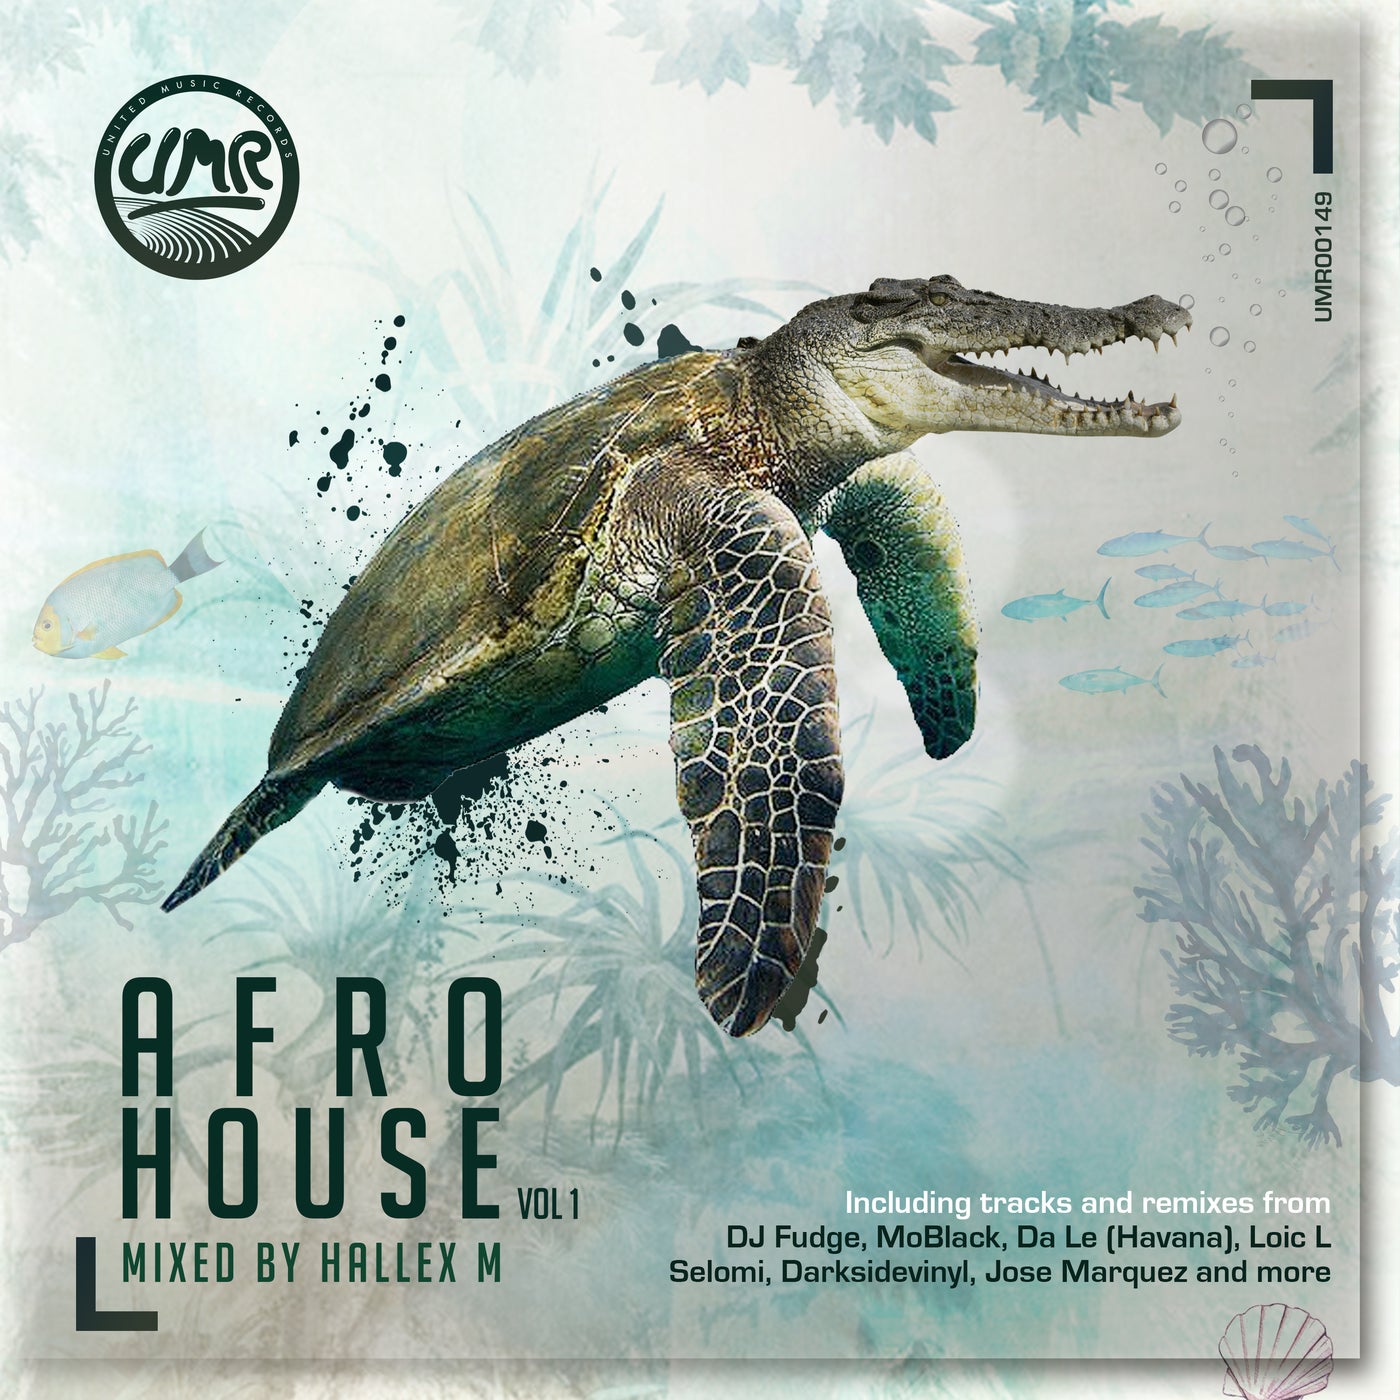 AFRO HOUSE Vol 1